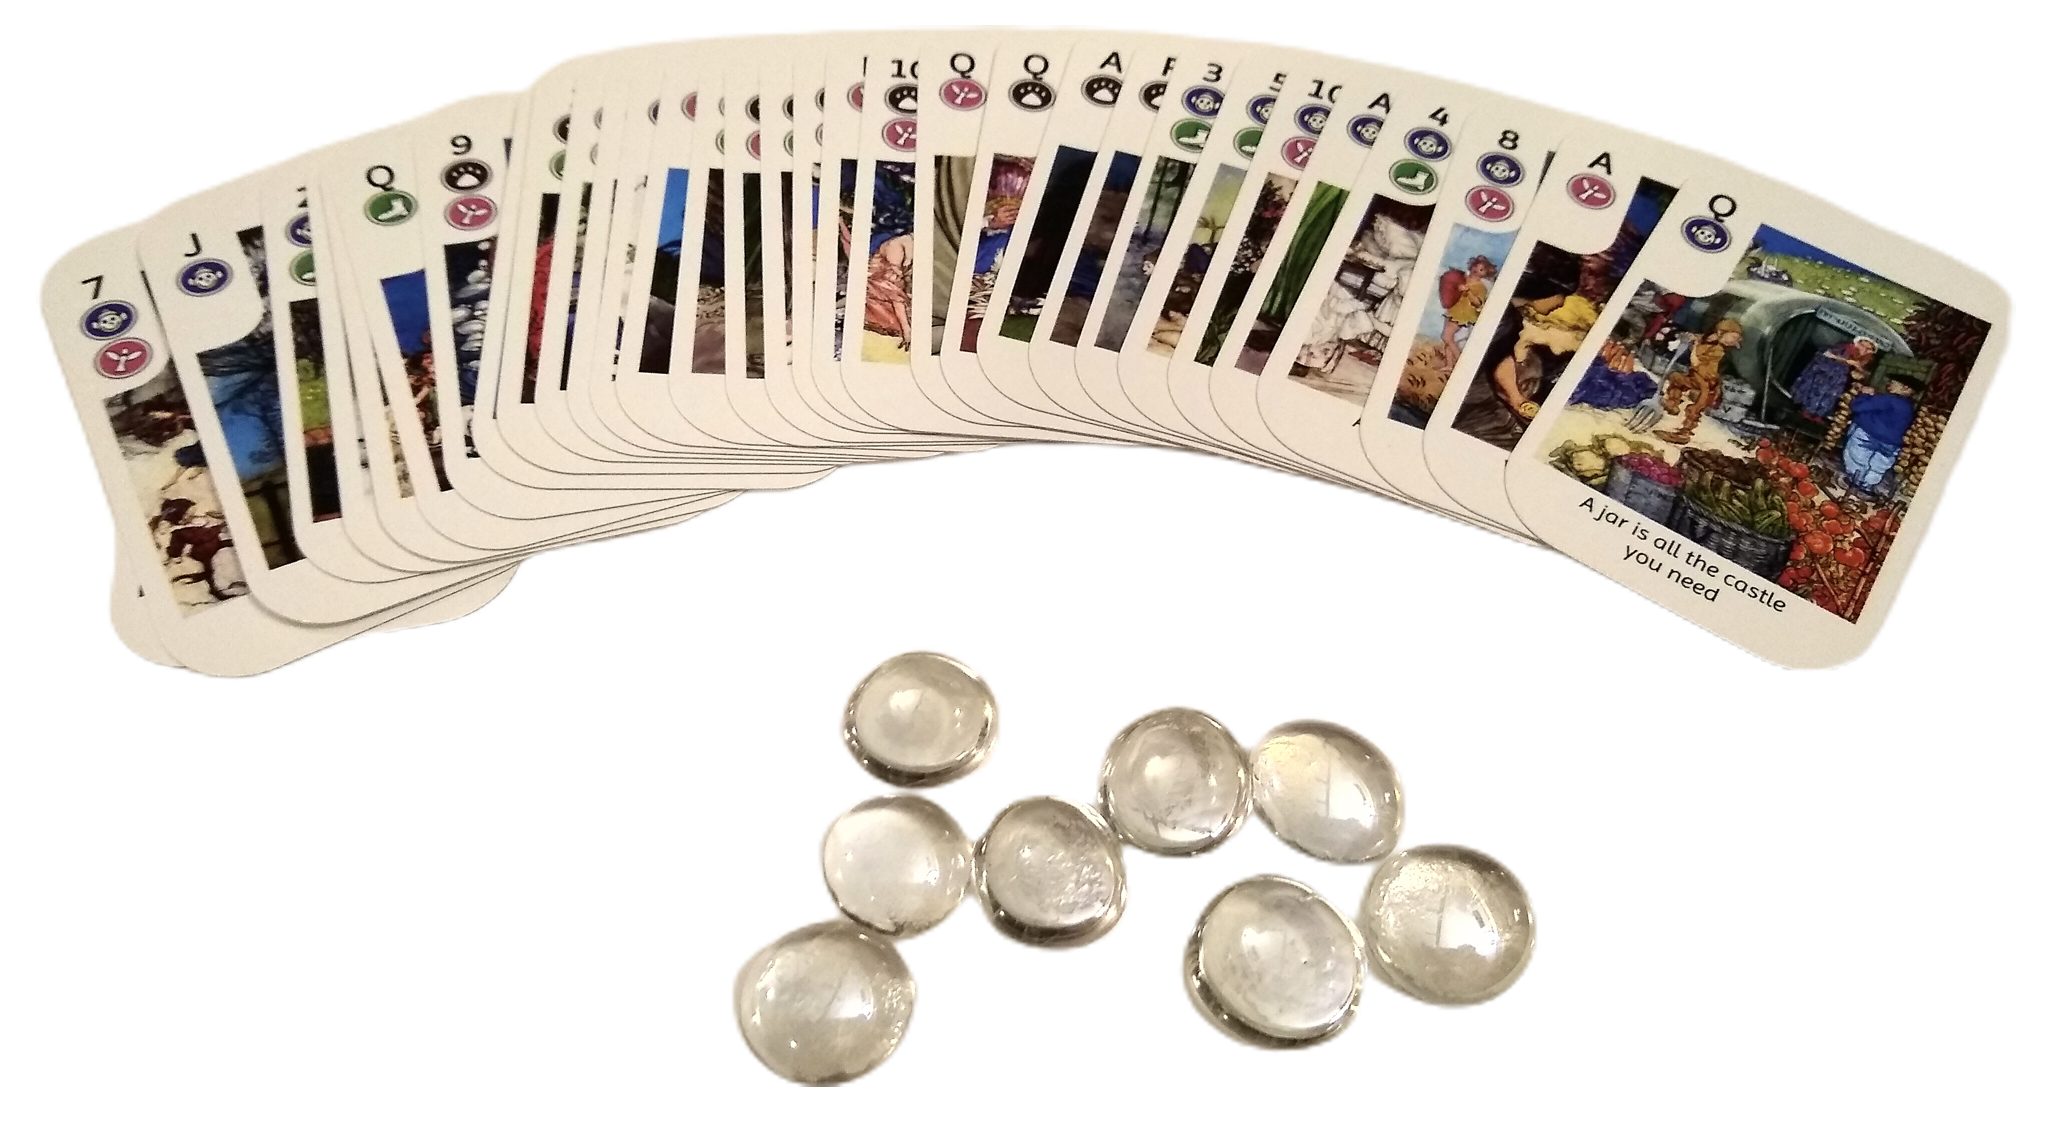 36 fairy game cards (including rule summaries)